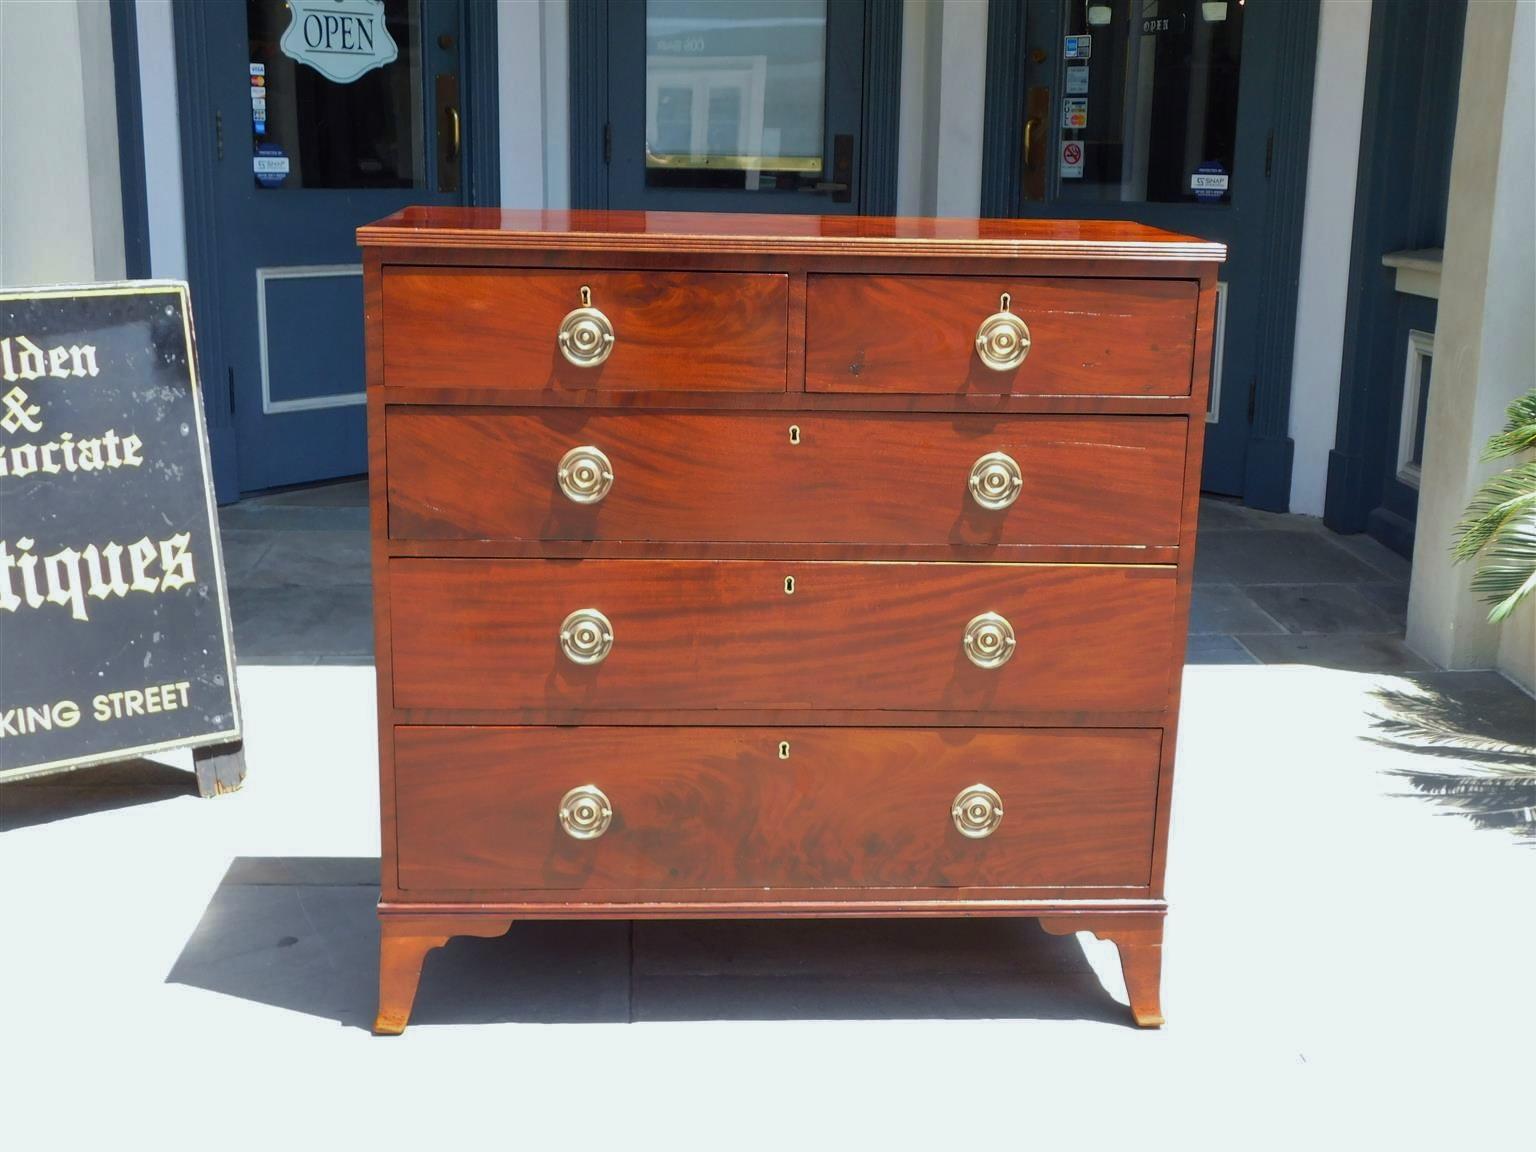 American Hepplewhite Mahogany chest of drawers with a reeded molded edge top, five graduated drawers with circular brasses, and resting on the original french splayed feet, Late 18th Century. Secondary wood consist of white pine and tulip poplar.